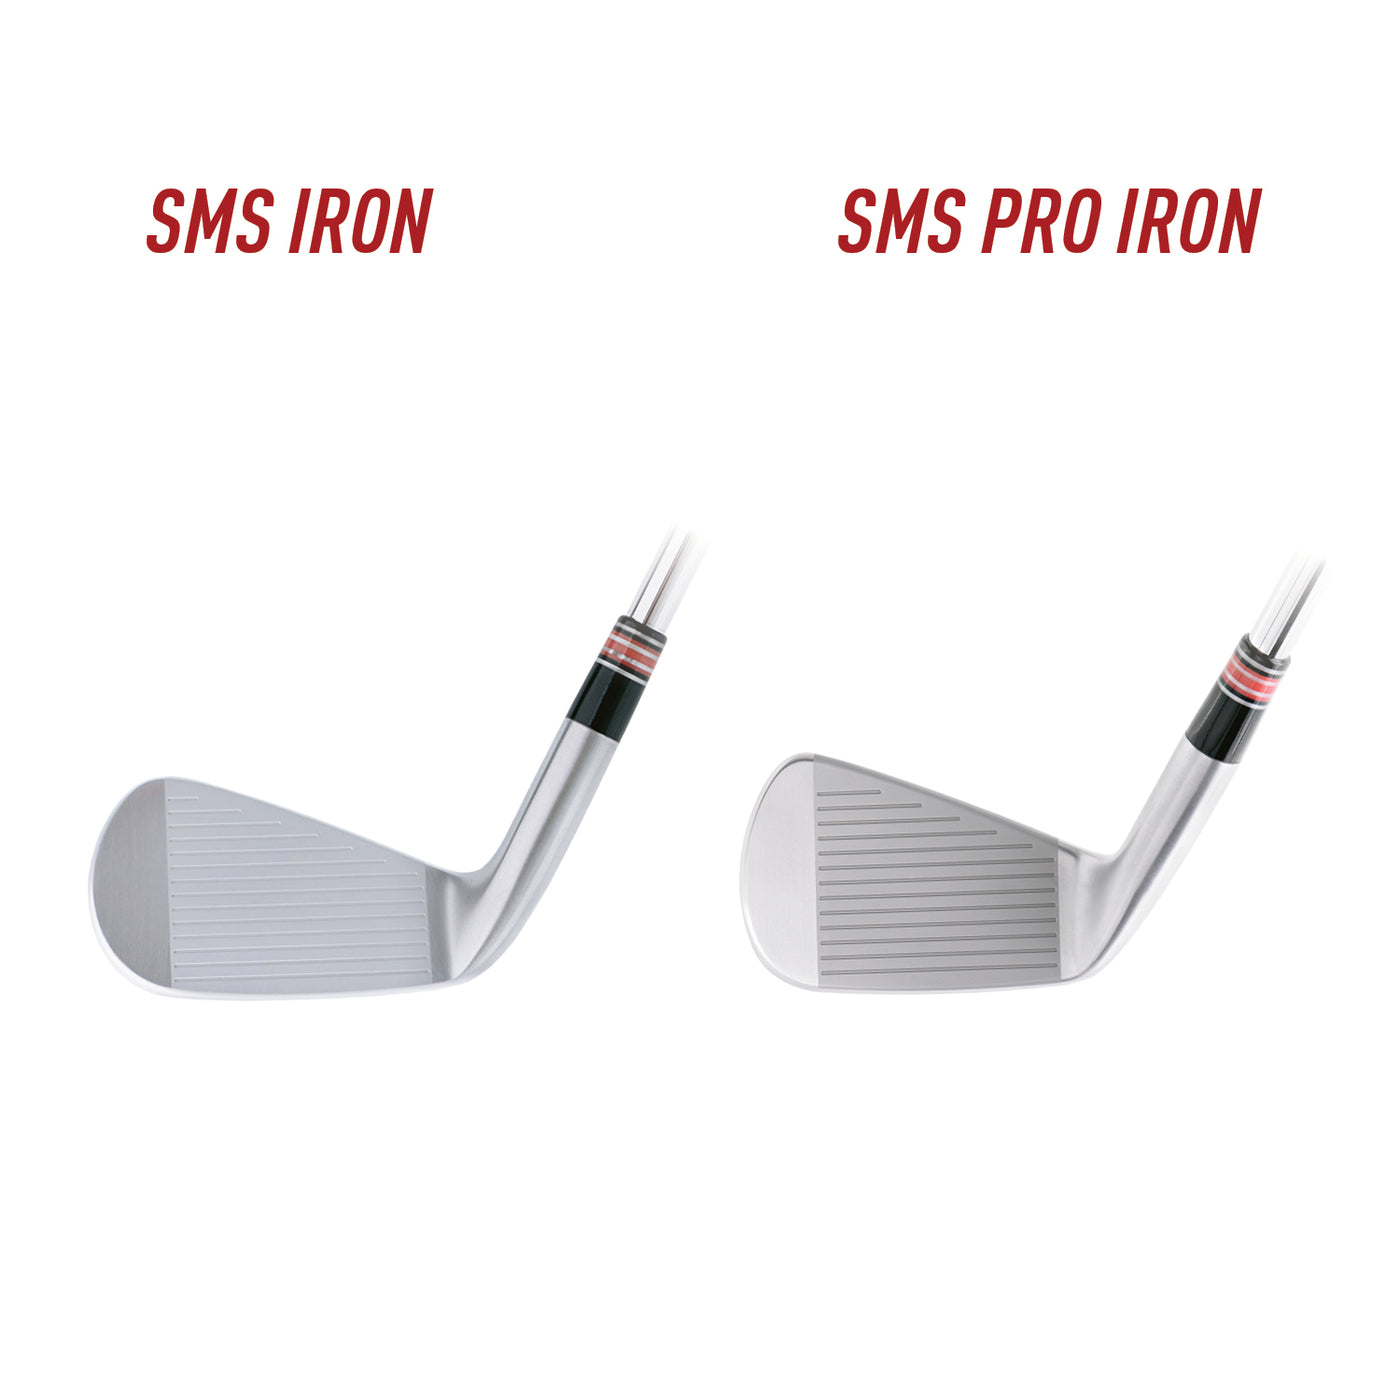 SMS vs. SMS Pro Irons Face View